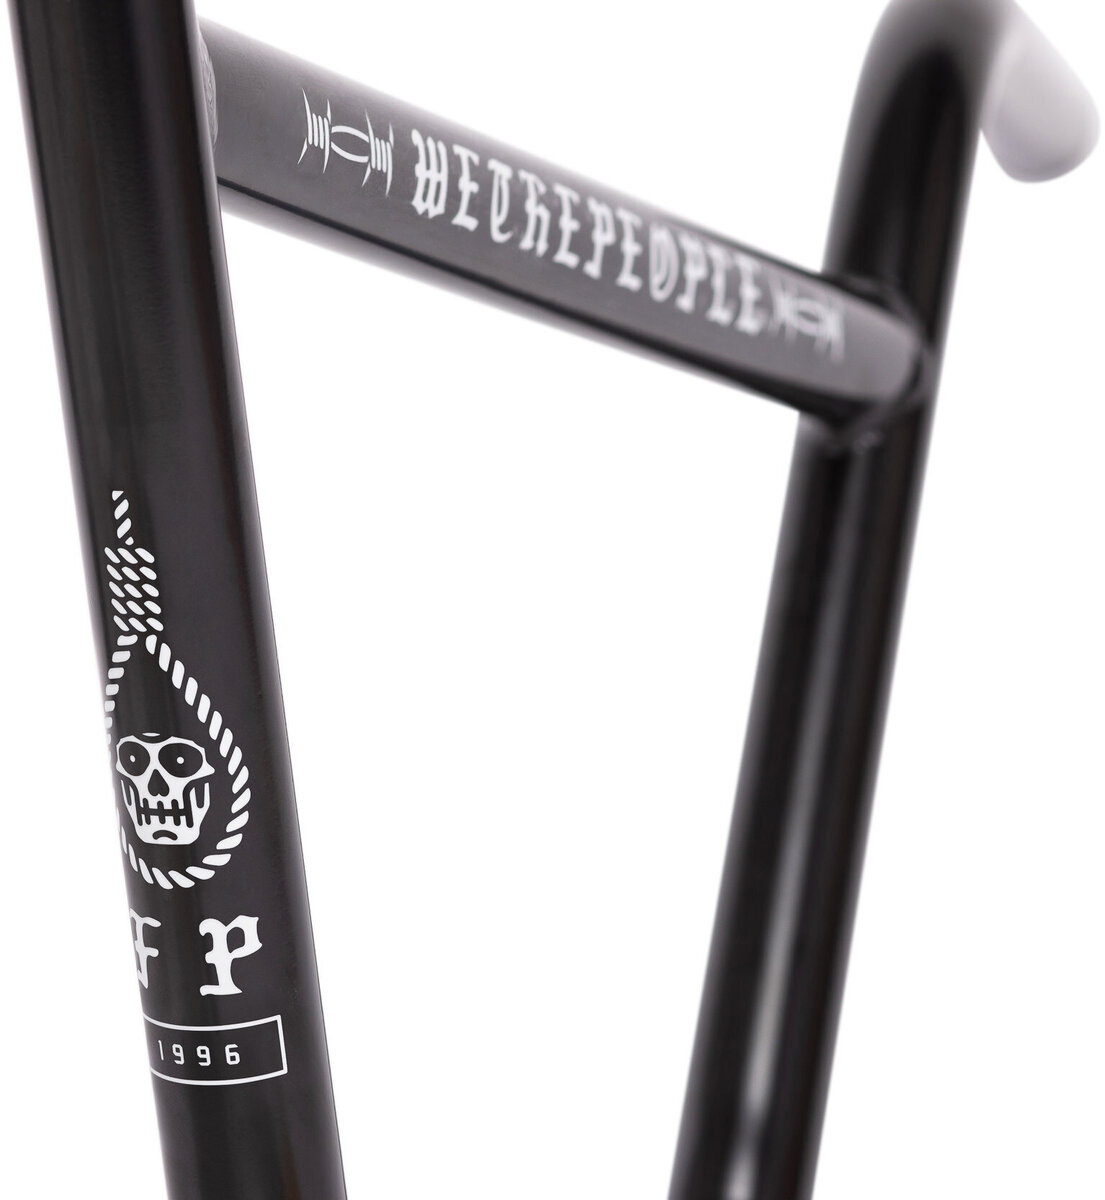 PATHFINDER 4 PIECE BAR BLACK 25.4MM 9IN WE THE PEOPLE 